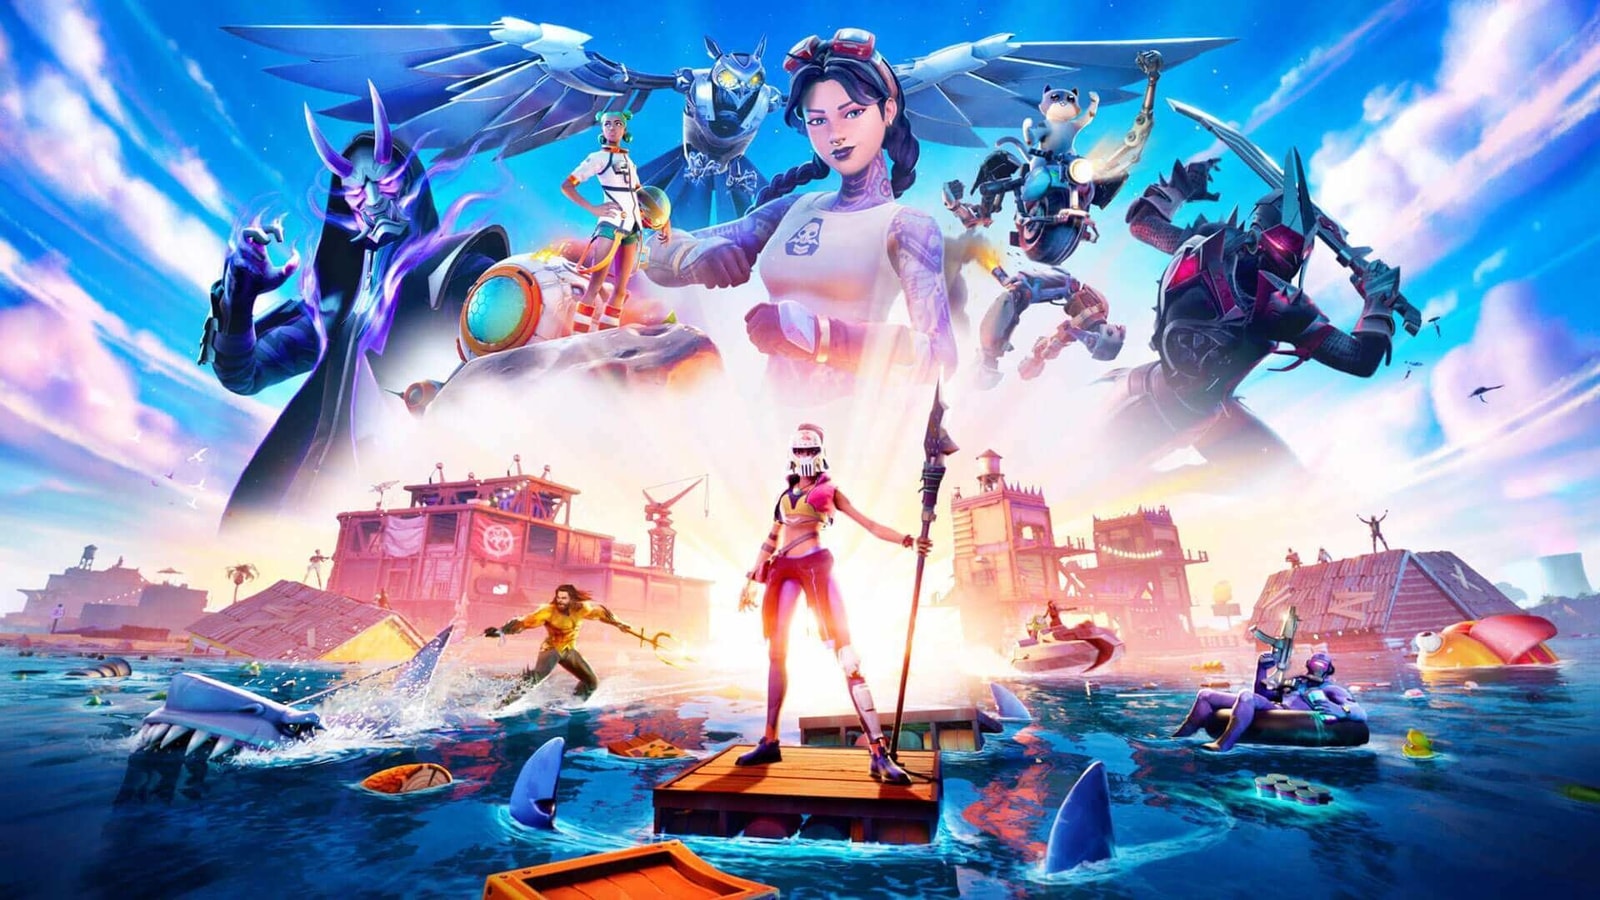 Fortnite removed from App Store and Play Store, Epic will sue - Industry -  News - HEXUS.net